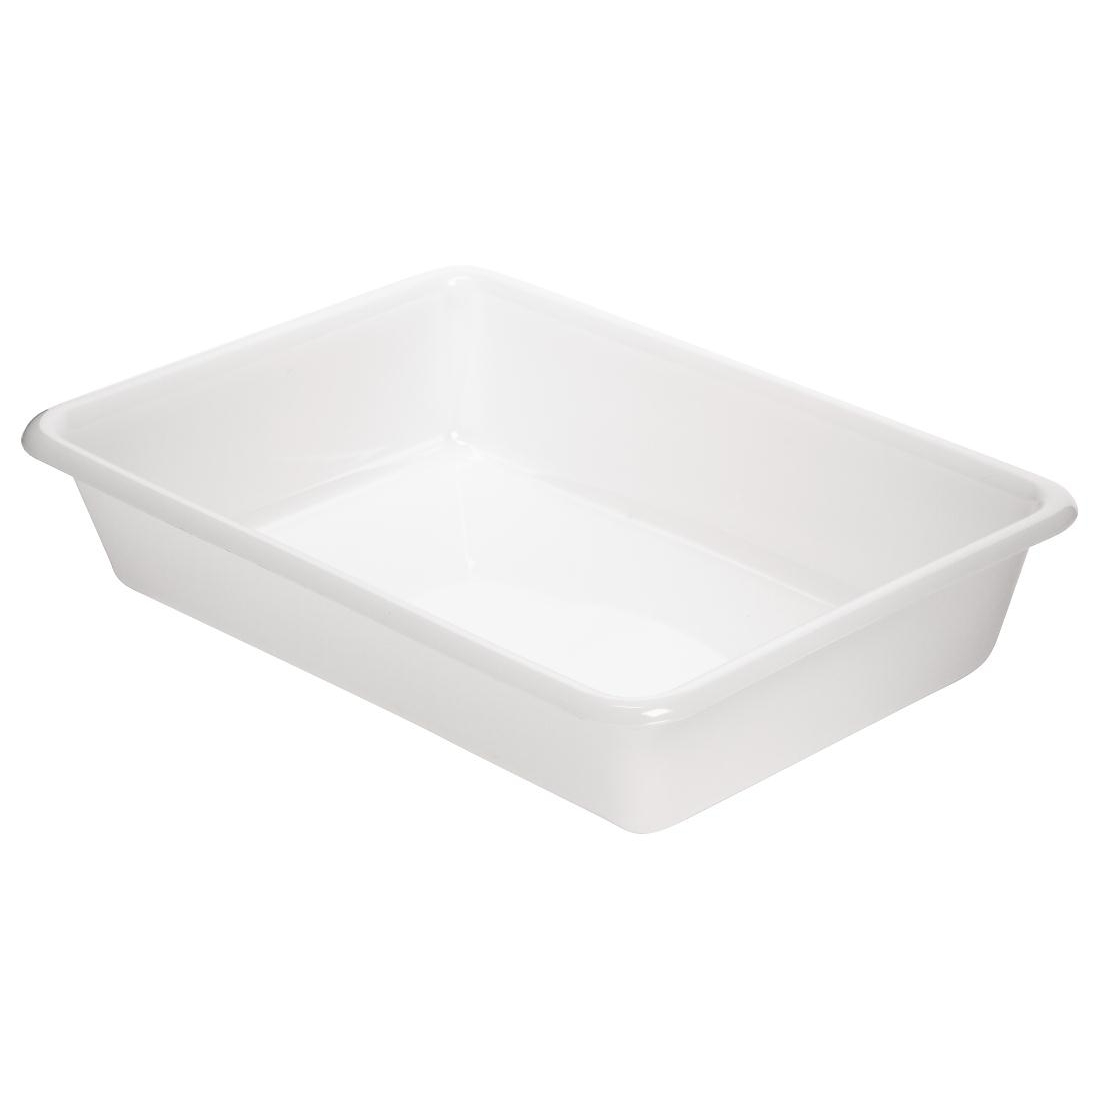 Araven Shallow Food Storage Tray 19in